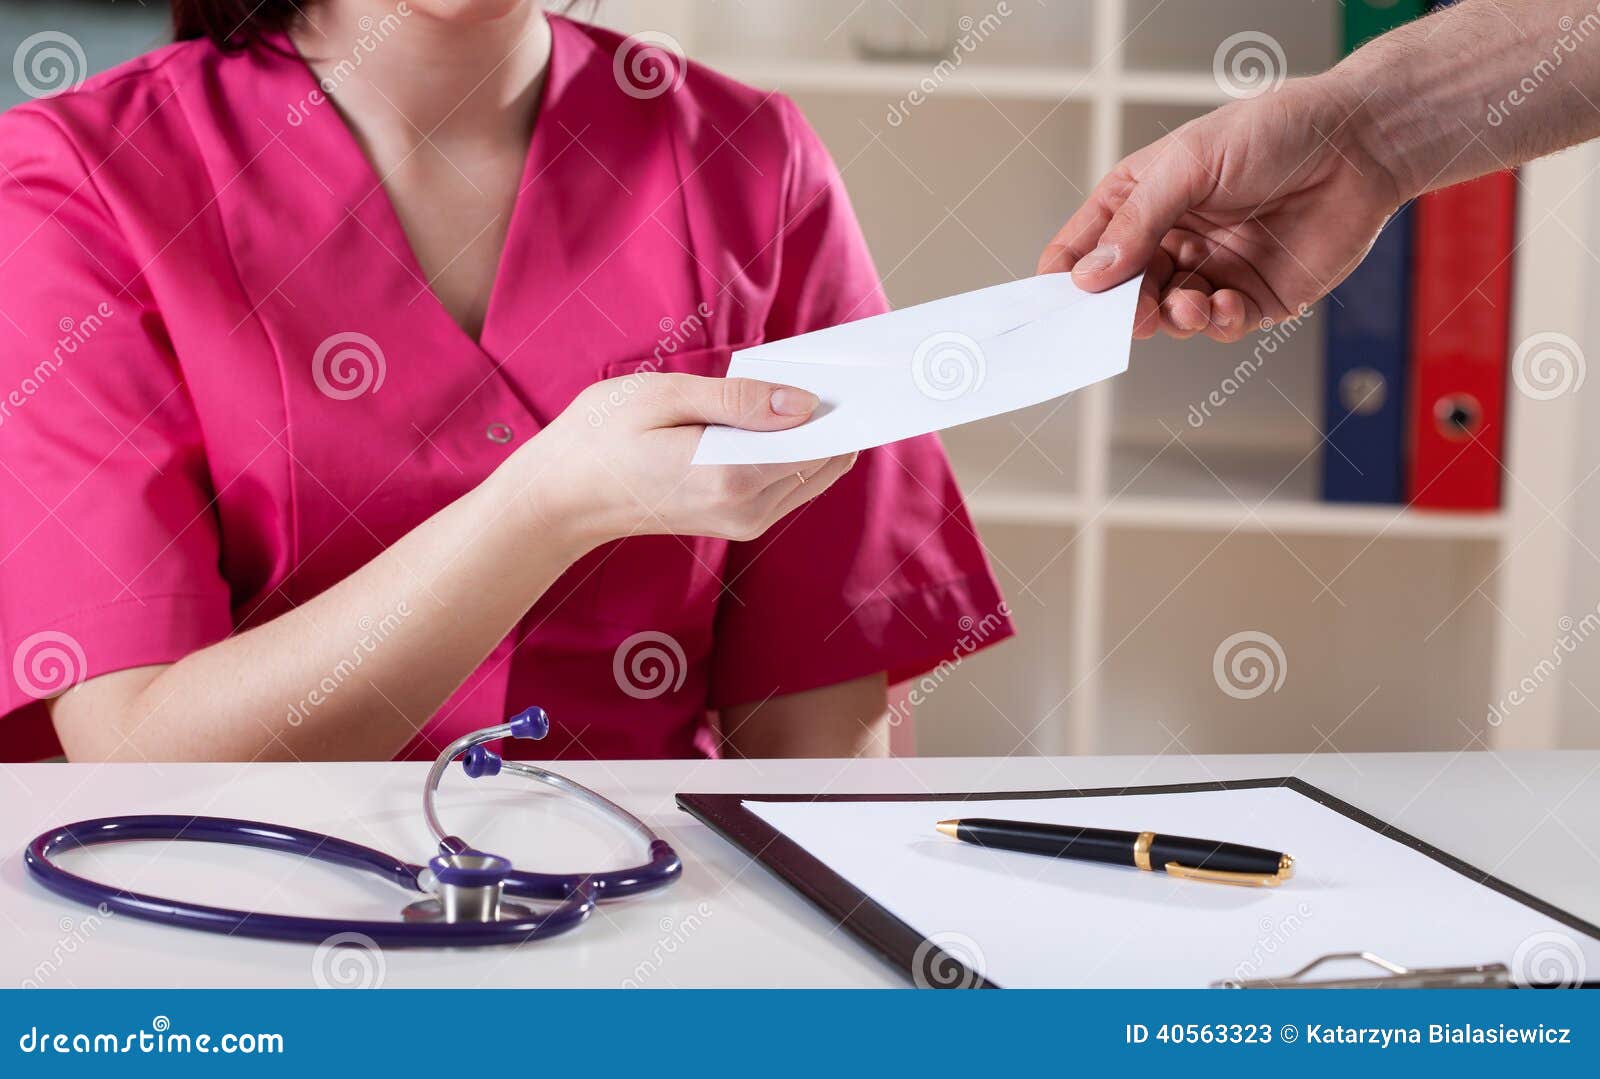 doctor accepting bribery